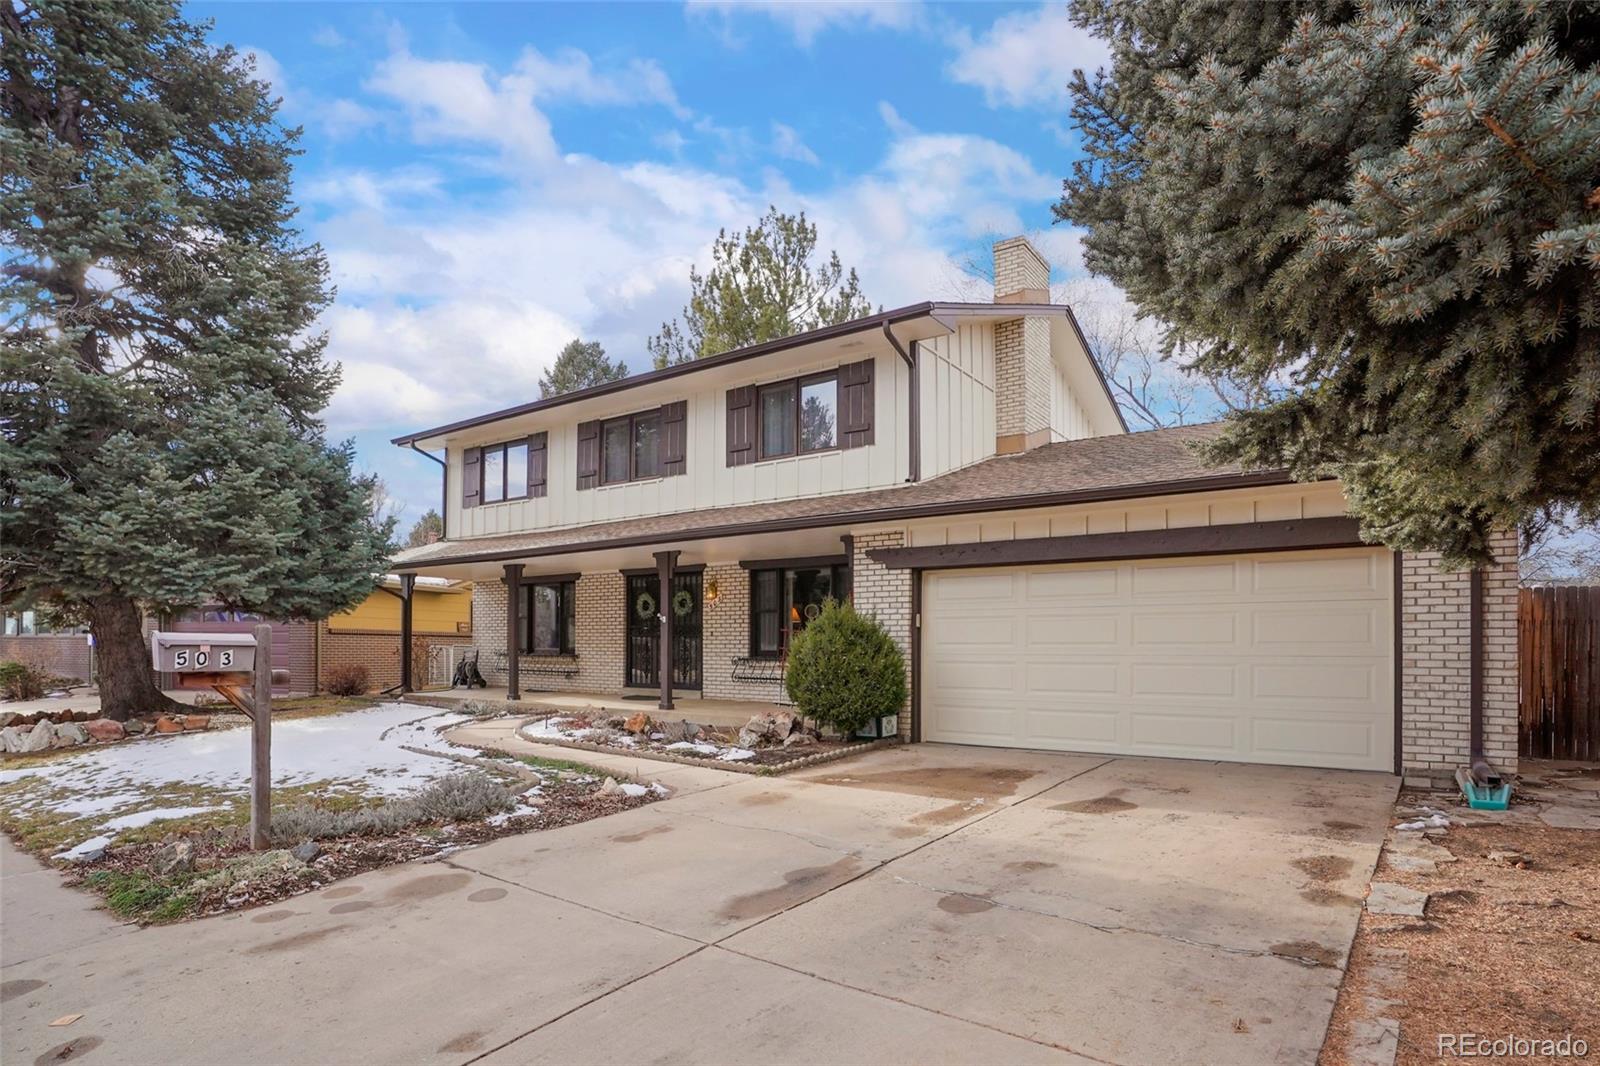 Report Image for 503 S Carr Street,Lakewood, Colorado